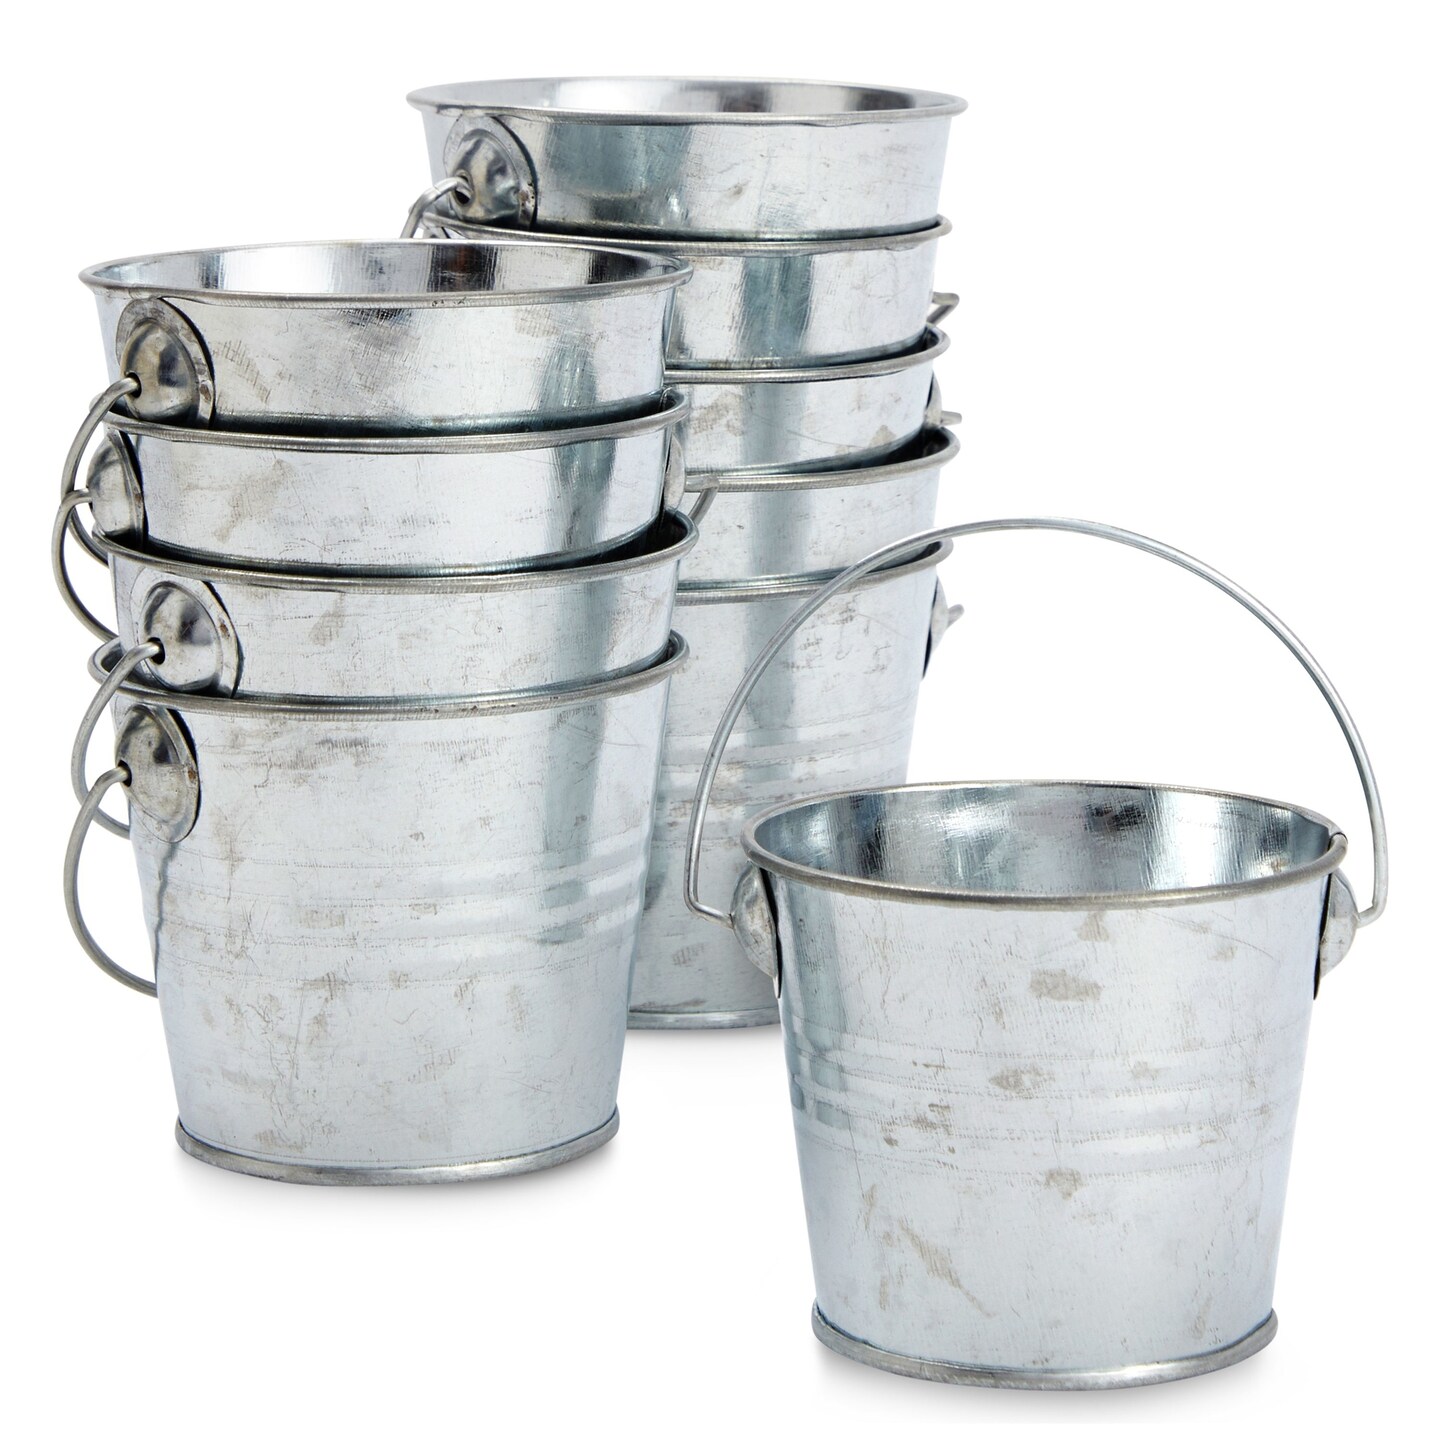 Small Tin Pail by 3.75 x 4.75 in White by Celebrate It